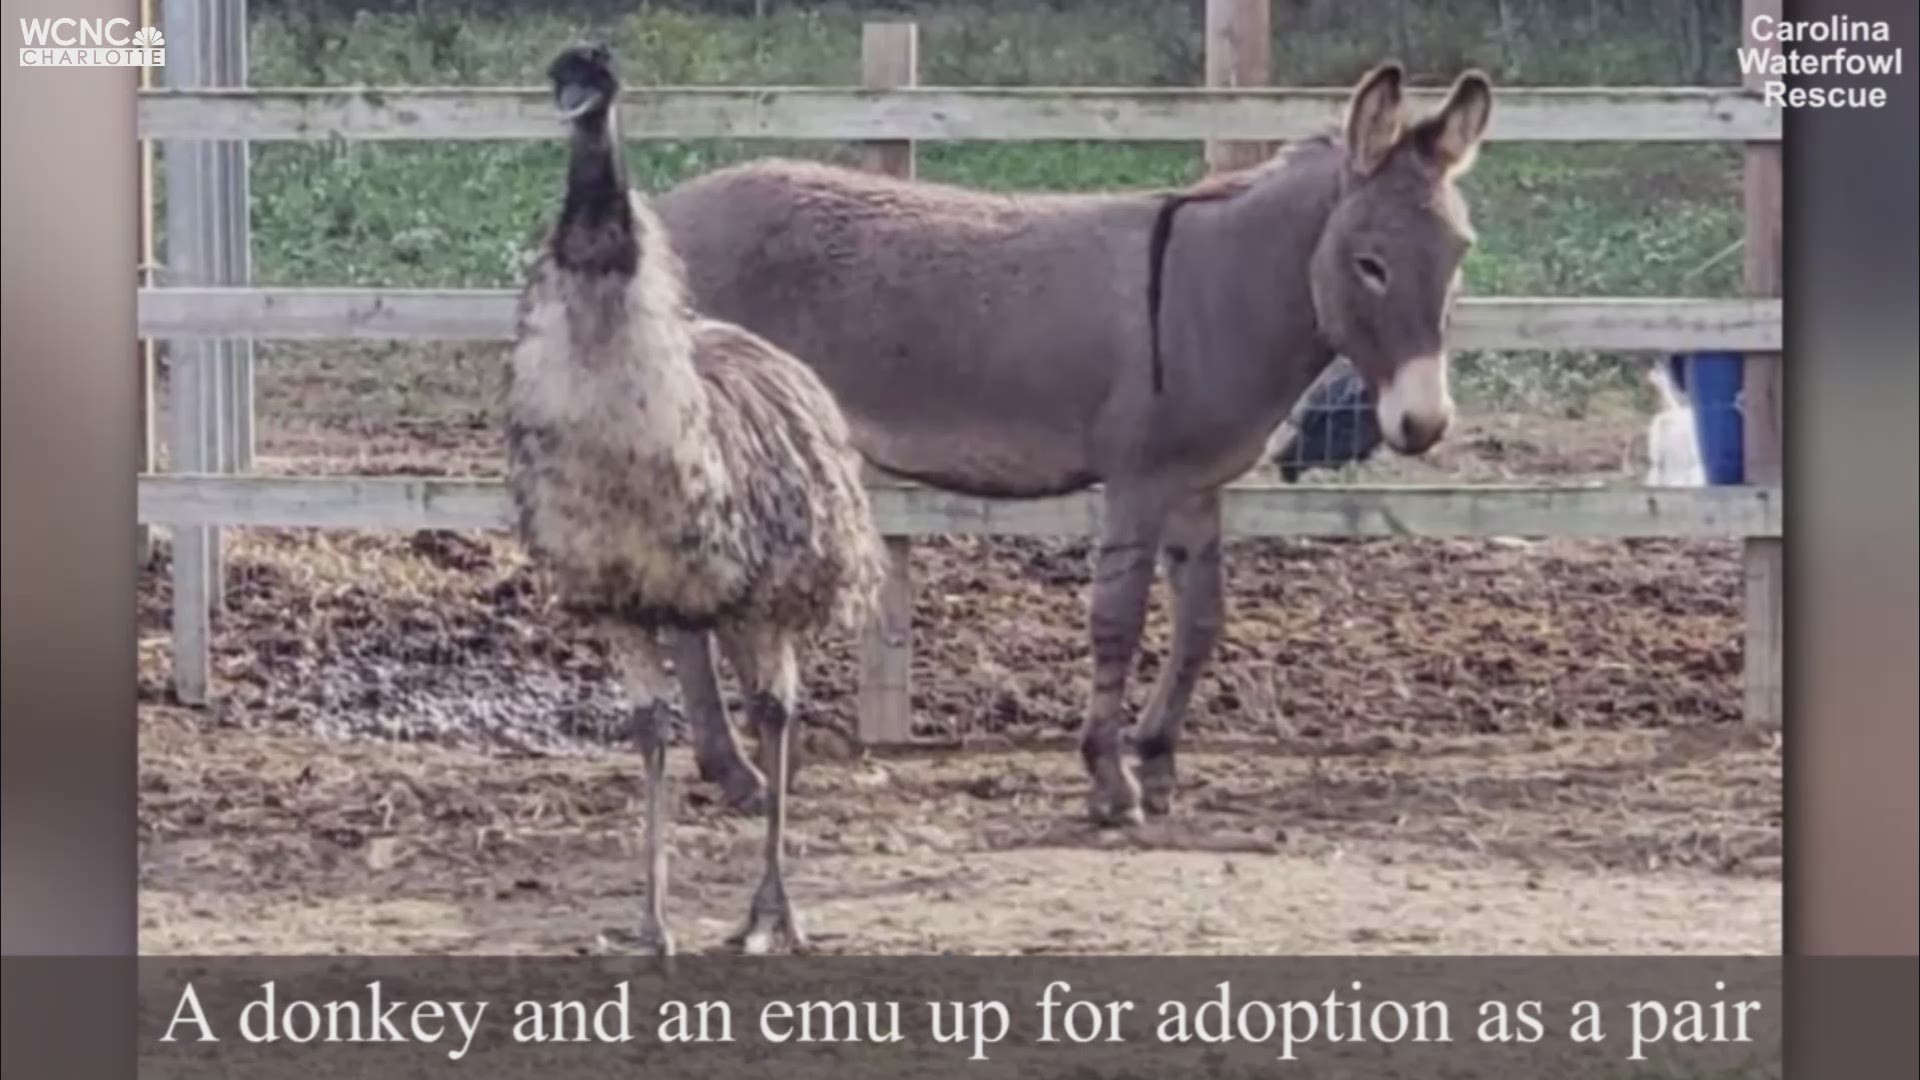 It seems Jack and Diane, as they've been aptly named, have formed quite the bond after being brought to the rescue in Indian Trail. In fact, Jack, the donkey, is a bit jealous and protective when it comes to Diane, the emu.